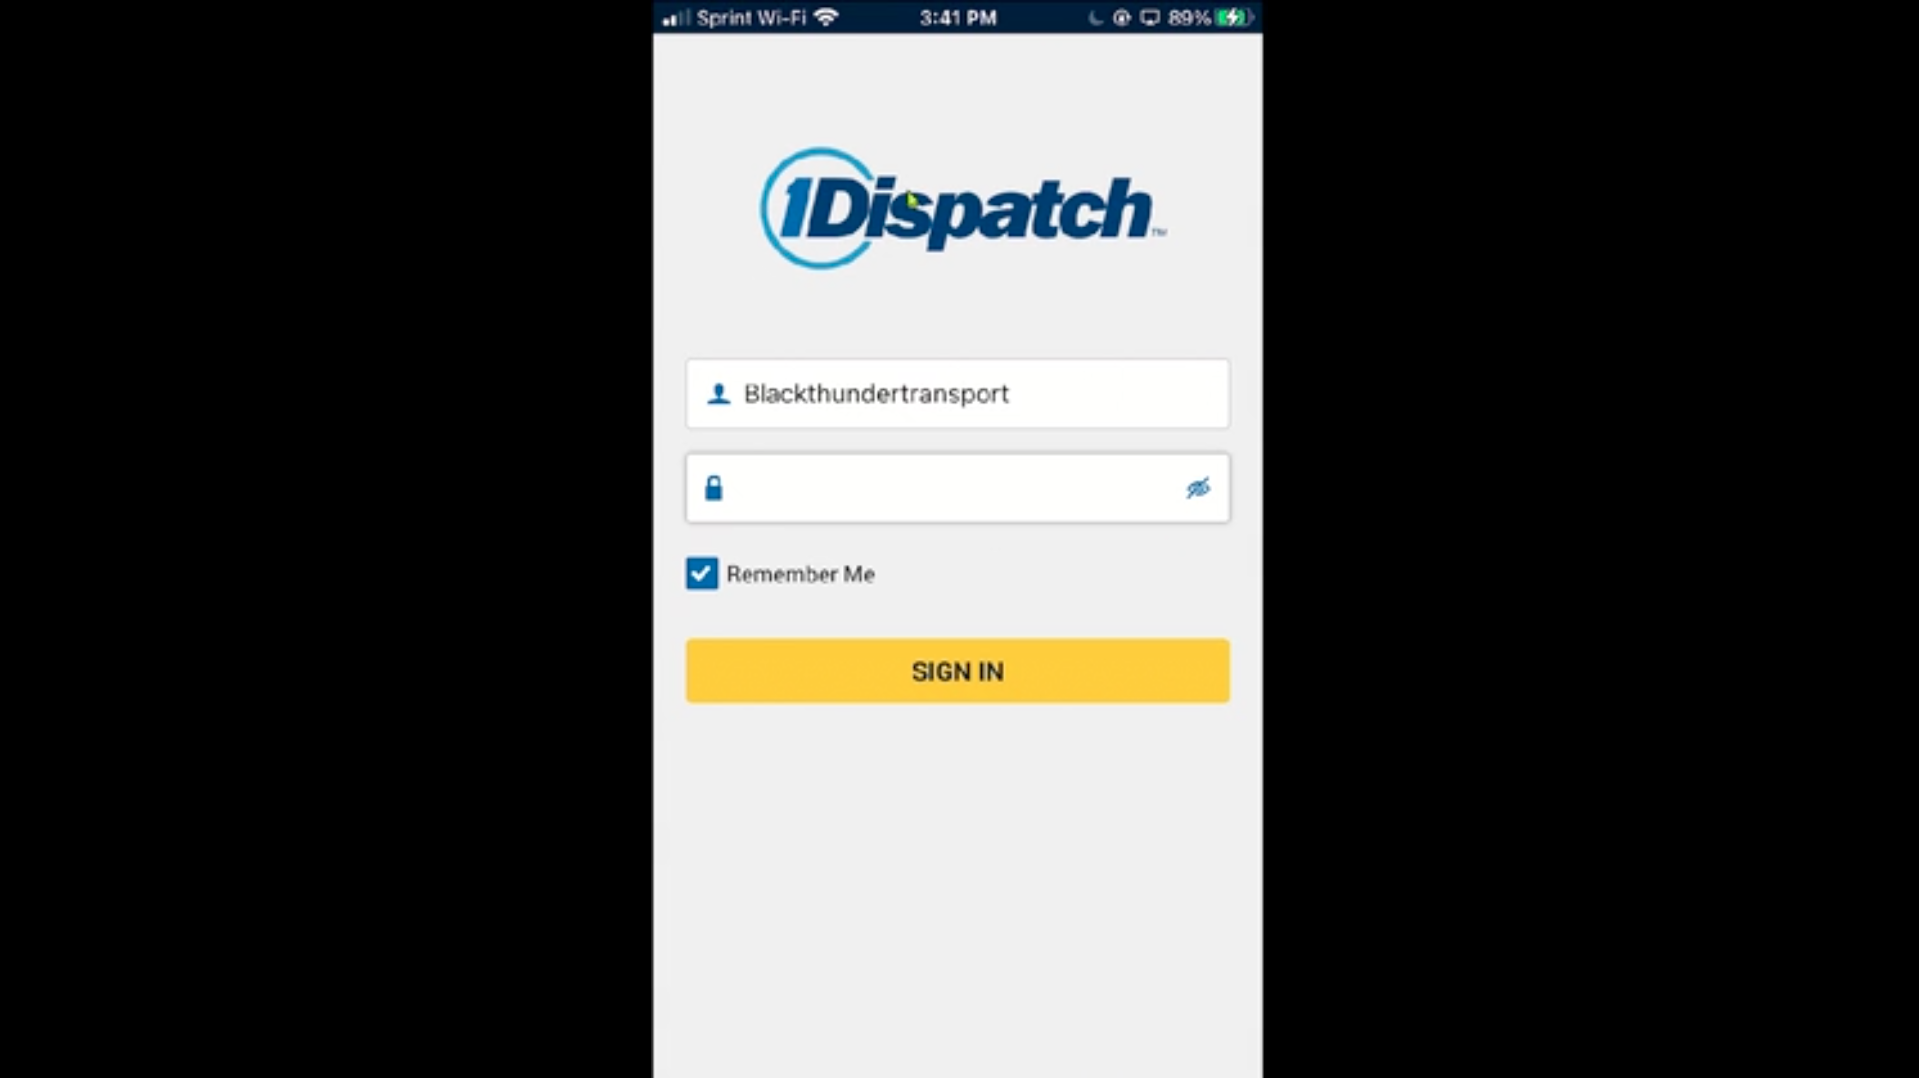 New 1Dispatch Mobile App Into Video